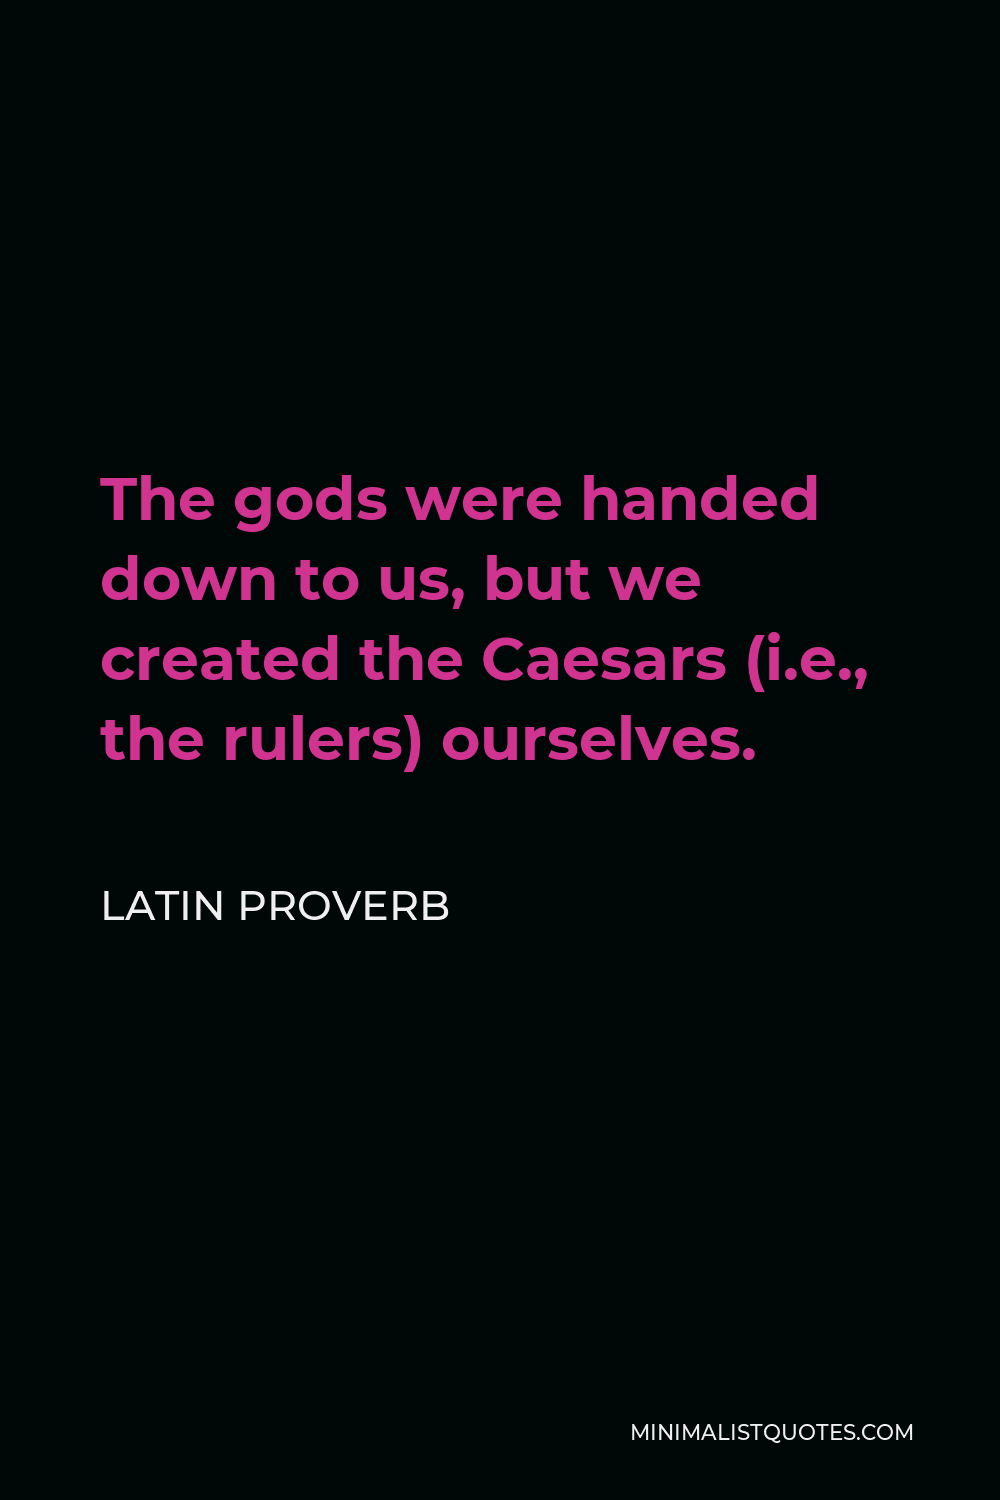 Latin Proverb Quote - The gods were handed down to us, but we created the Caesars (i.e., the rulers) ourselves.